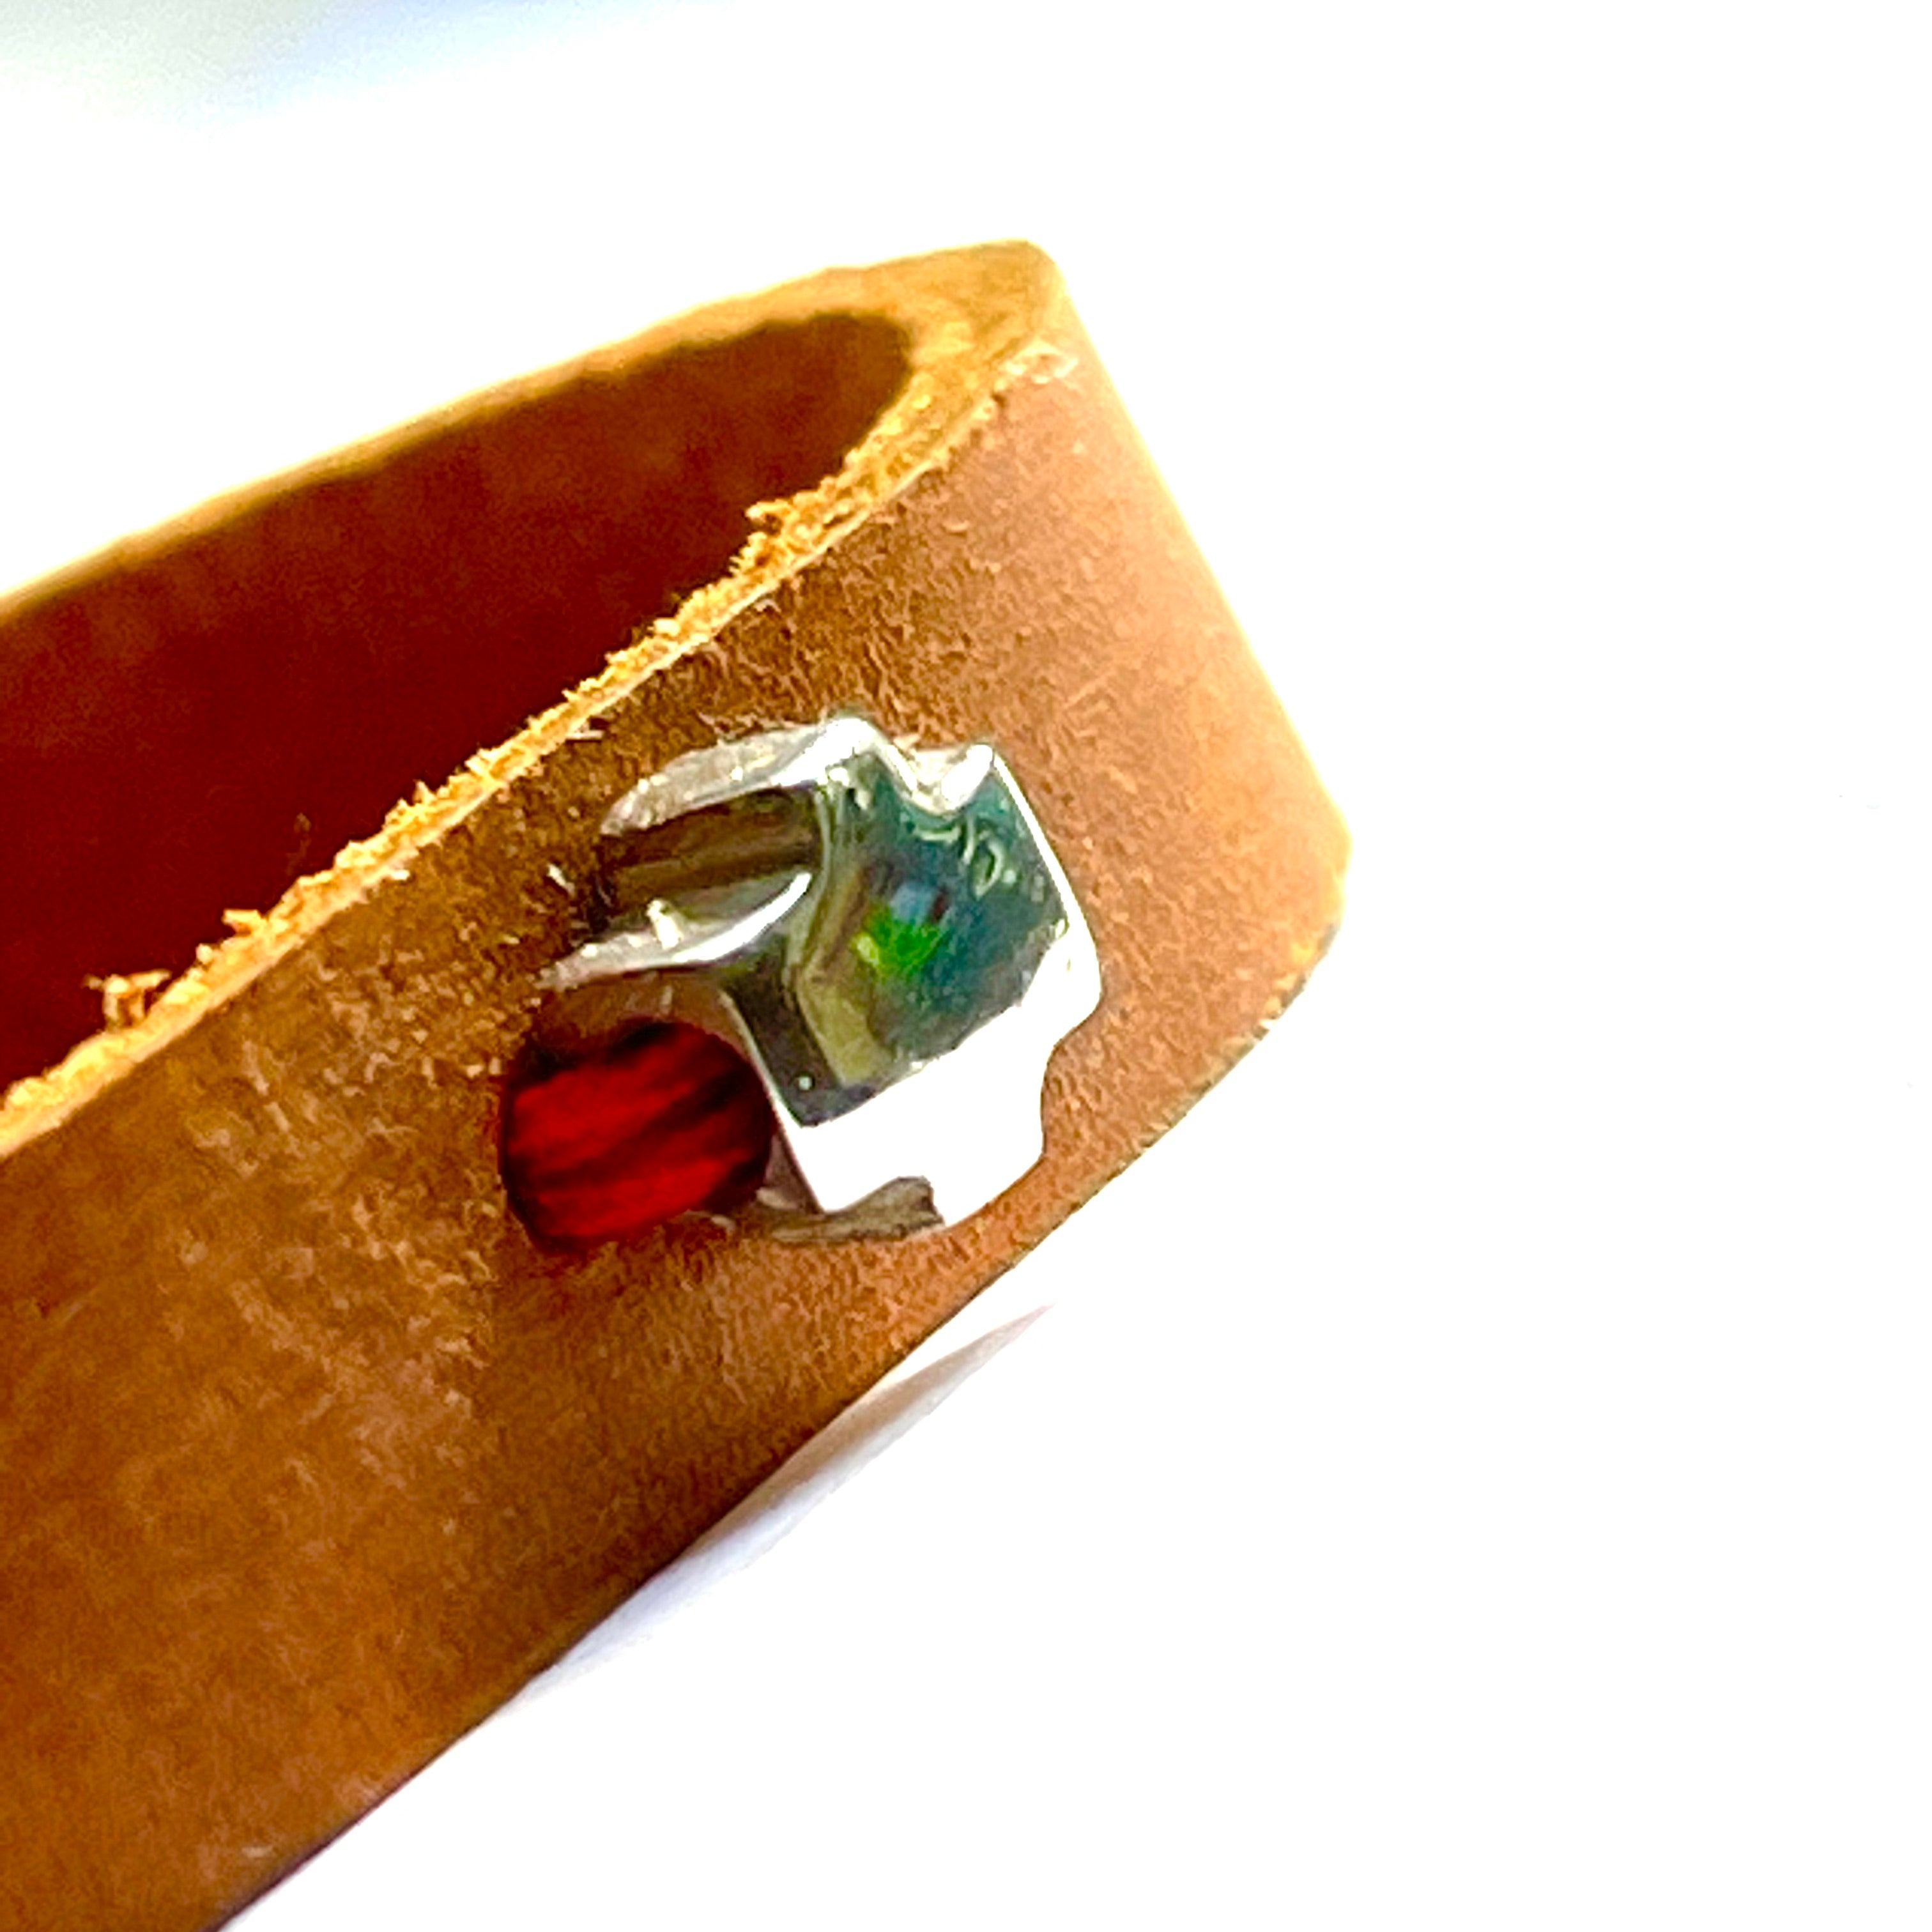 silver red stitching leather band bracelet